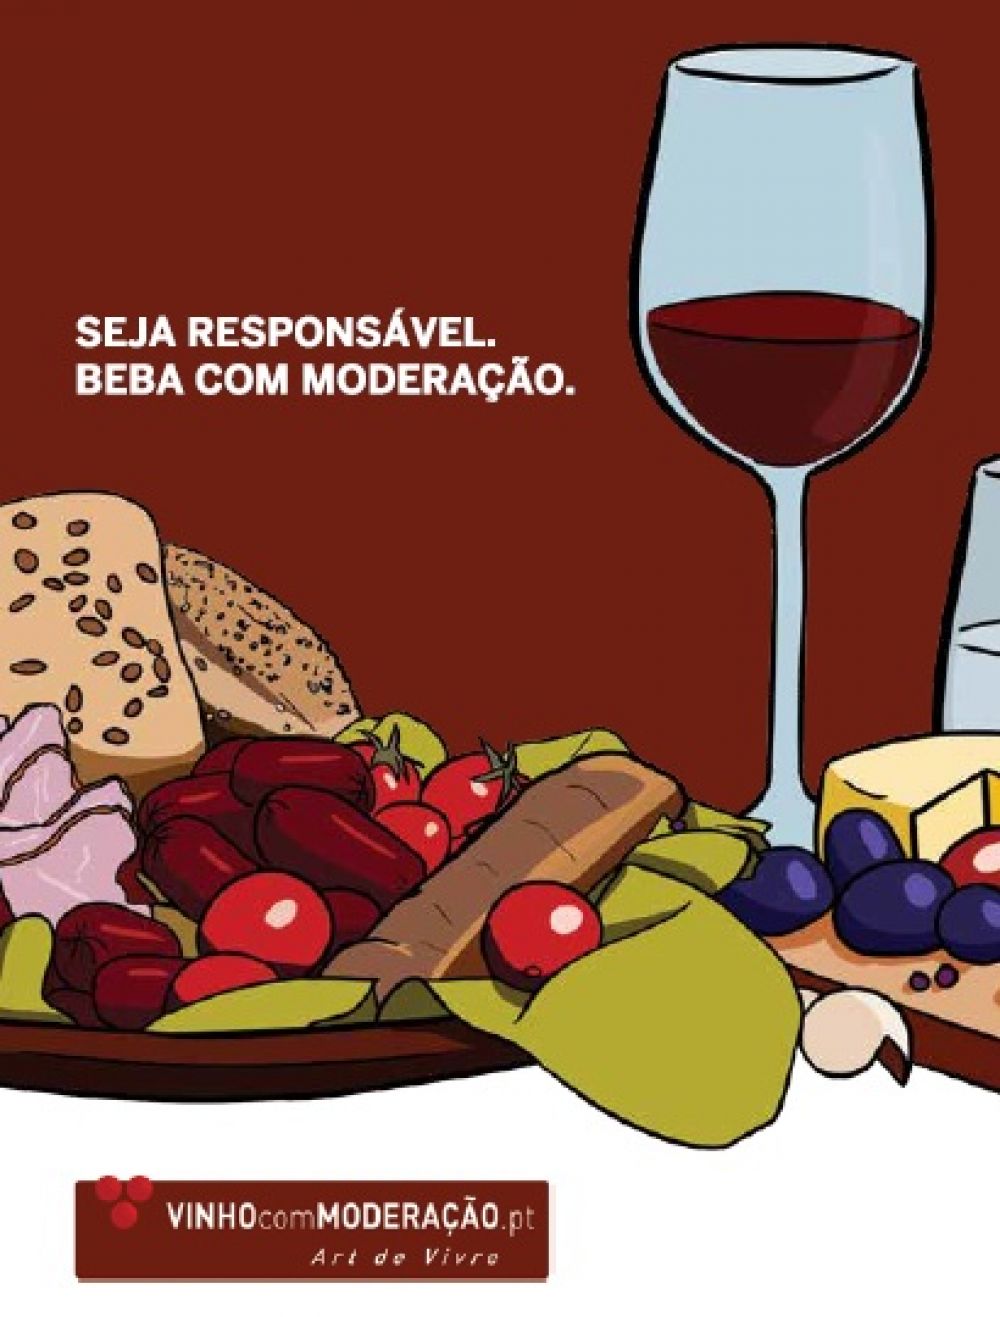 Comic books to explain how wine is best enjoyed in moderation